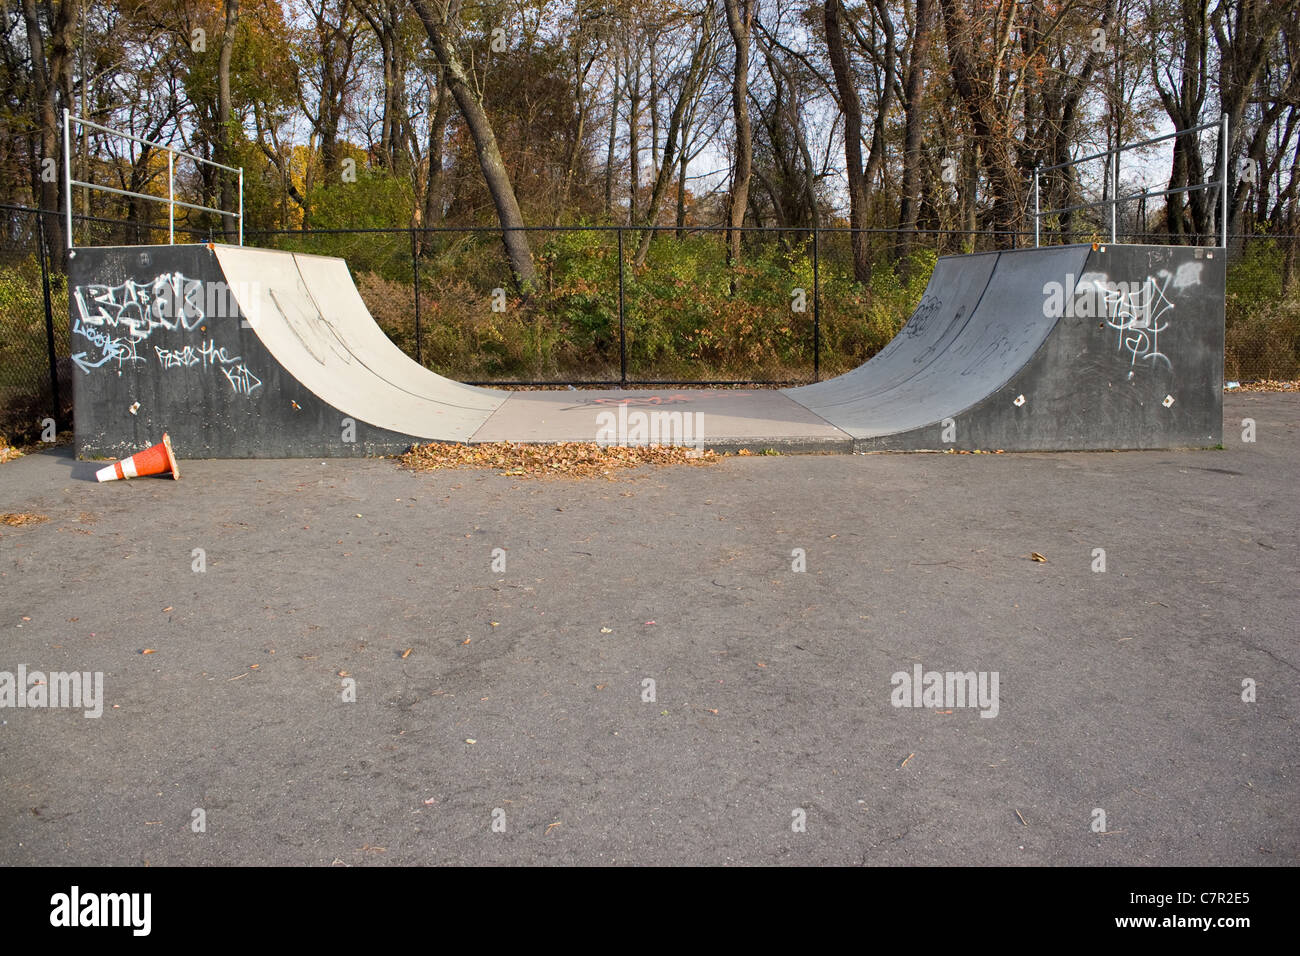 An empty halfpipe at an outdoor skate park. Stock Photo